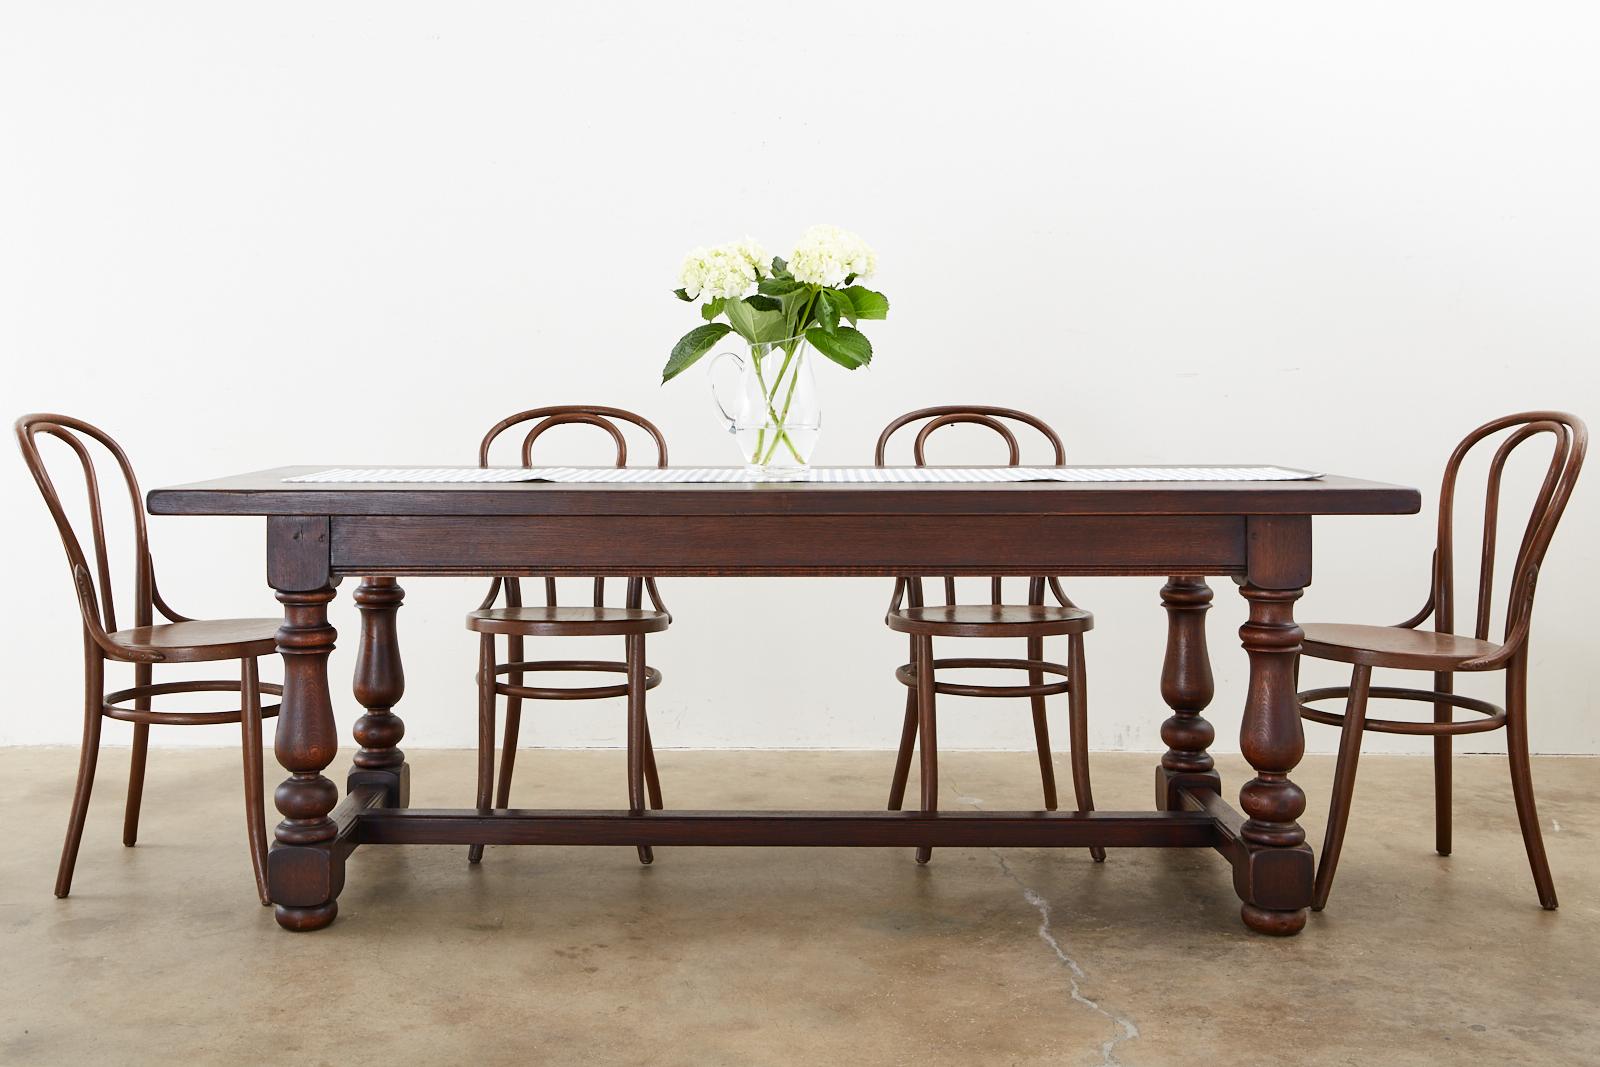 Distinctive French farmhouse trestle dining table made in the provincial style handcrafted from oak. The table features a nearly 2 inch thick plank top supported by a substantial trestle style base. The base has thick, chunky turned legs ending with